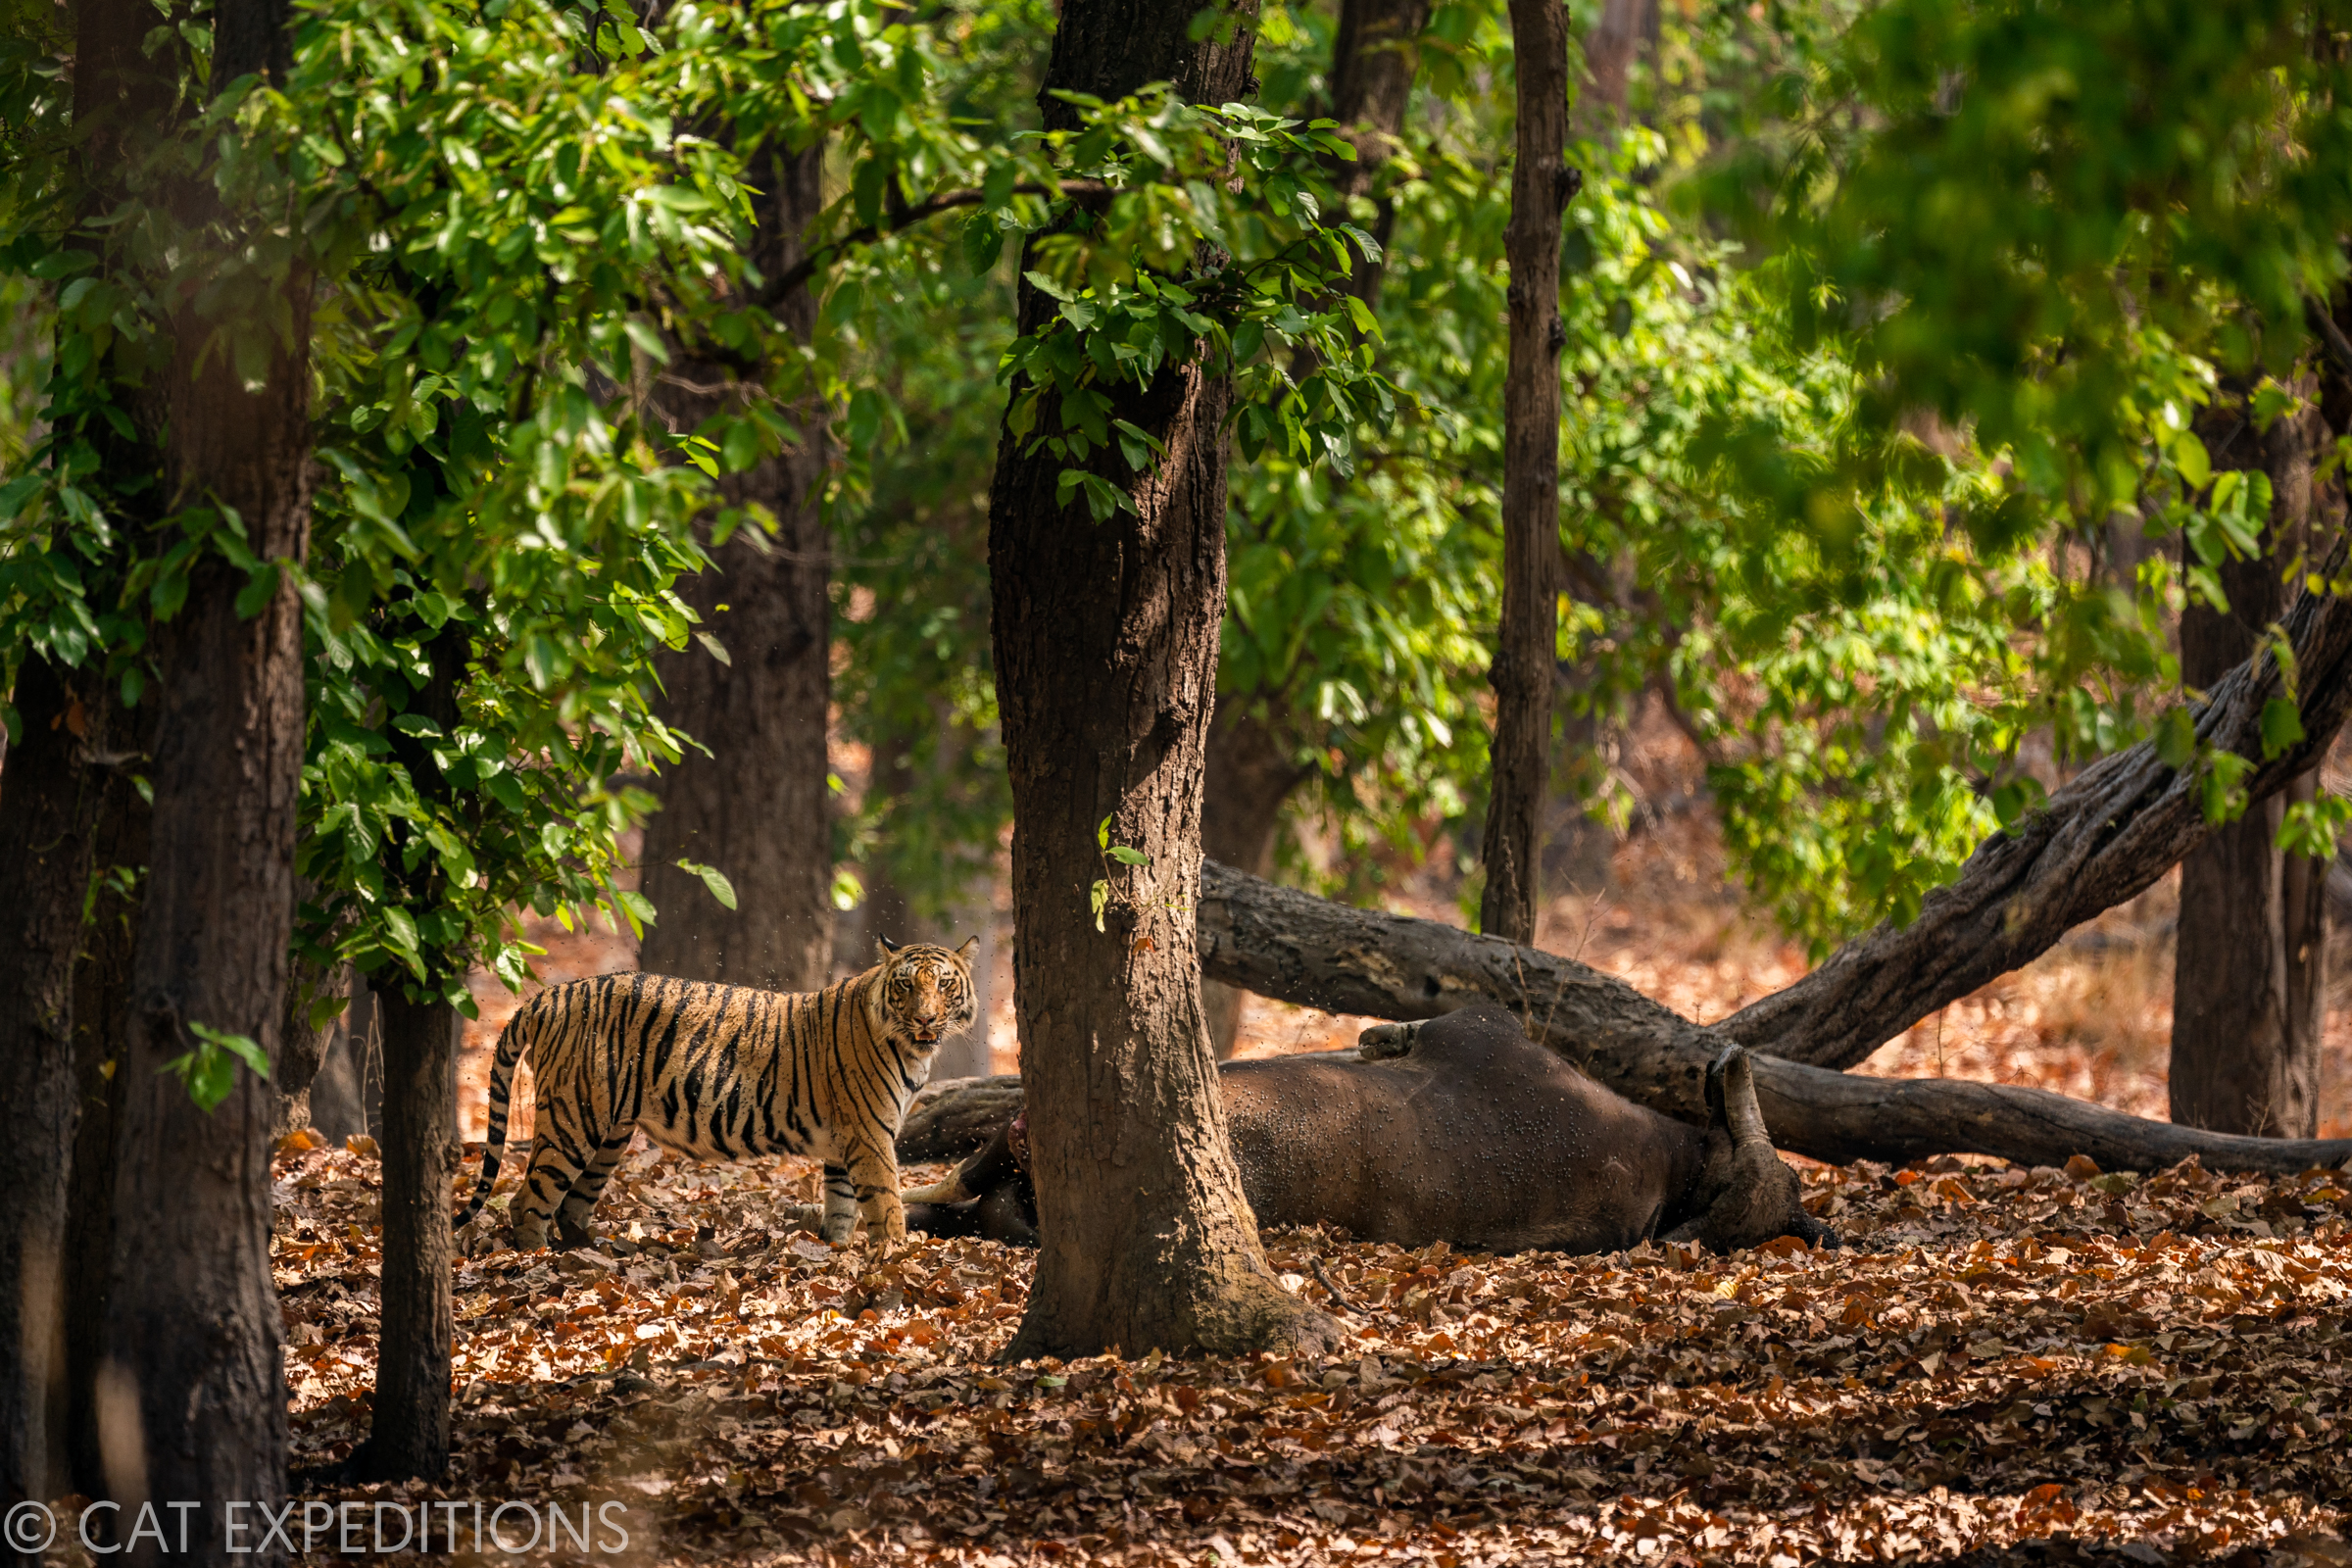 Tigers generally prey on animals bigger than themselves. Here a Bengal tiger stands with its 3300 lbs gaur kill in Bandhavgarh National Park in India.